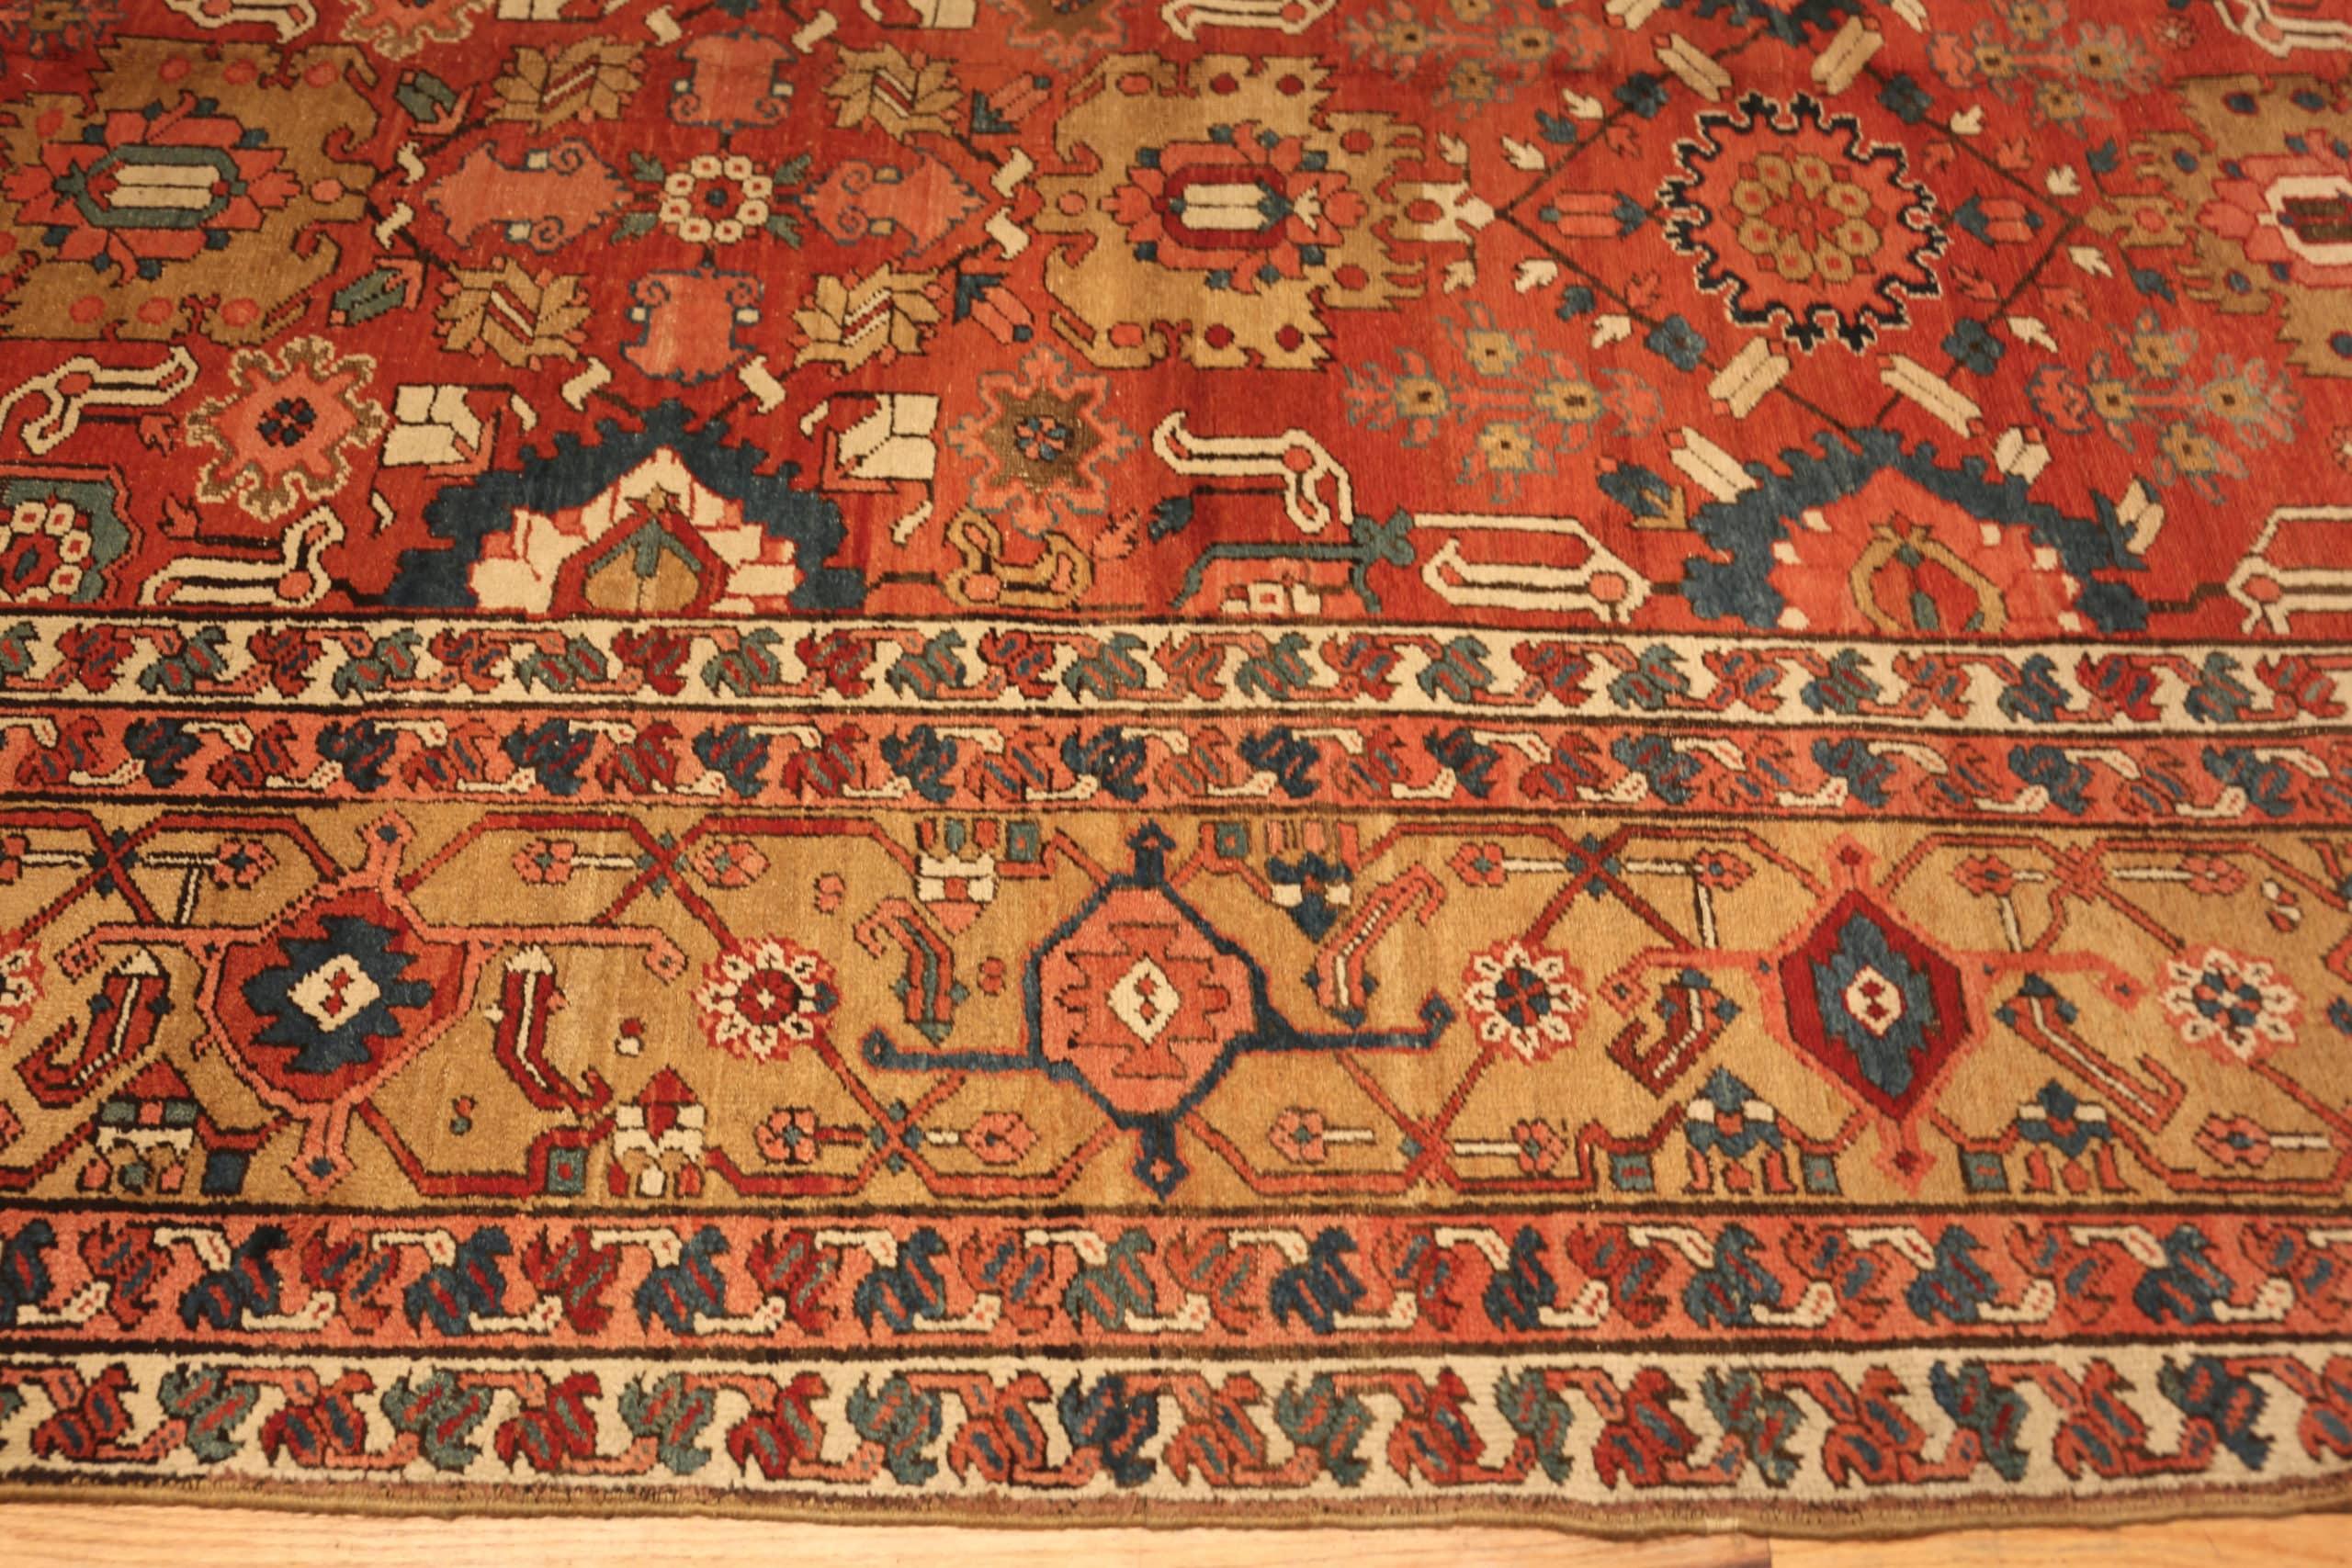 Oversized Antique Persian Heriz Serapi Rug, Country of origin / rug type: Persian rugs, Circa date: 1900. Size: 11 ft 8 in x 21 ft 8 in (3.56 m x 6.6 m)

